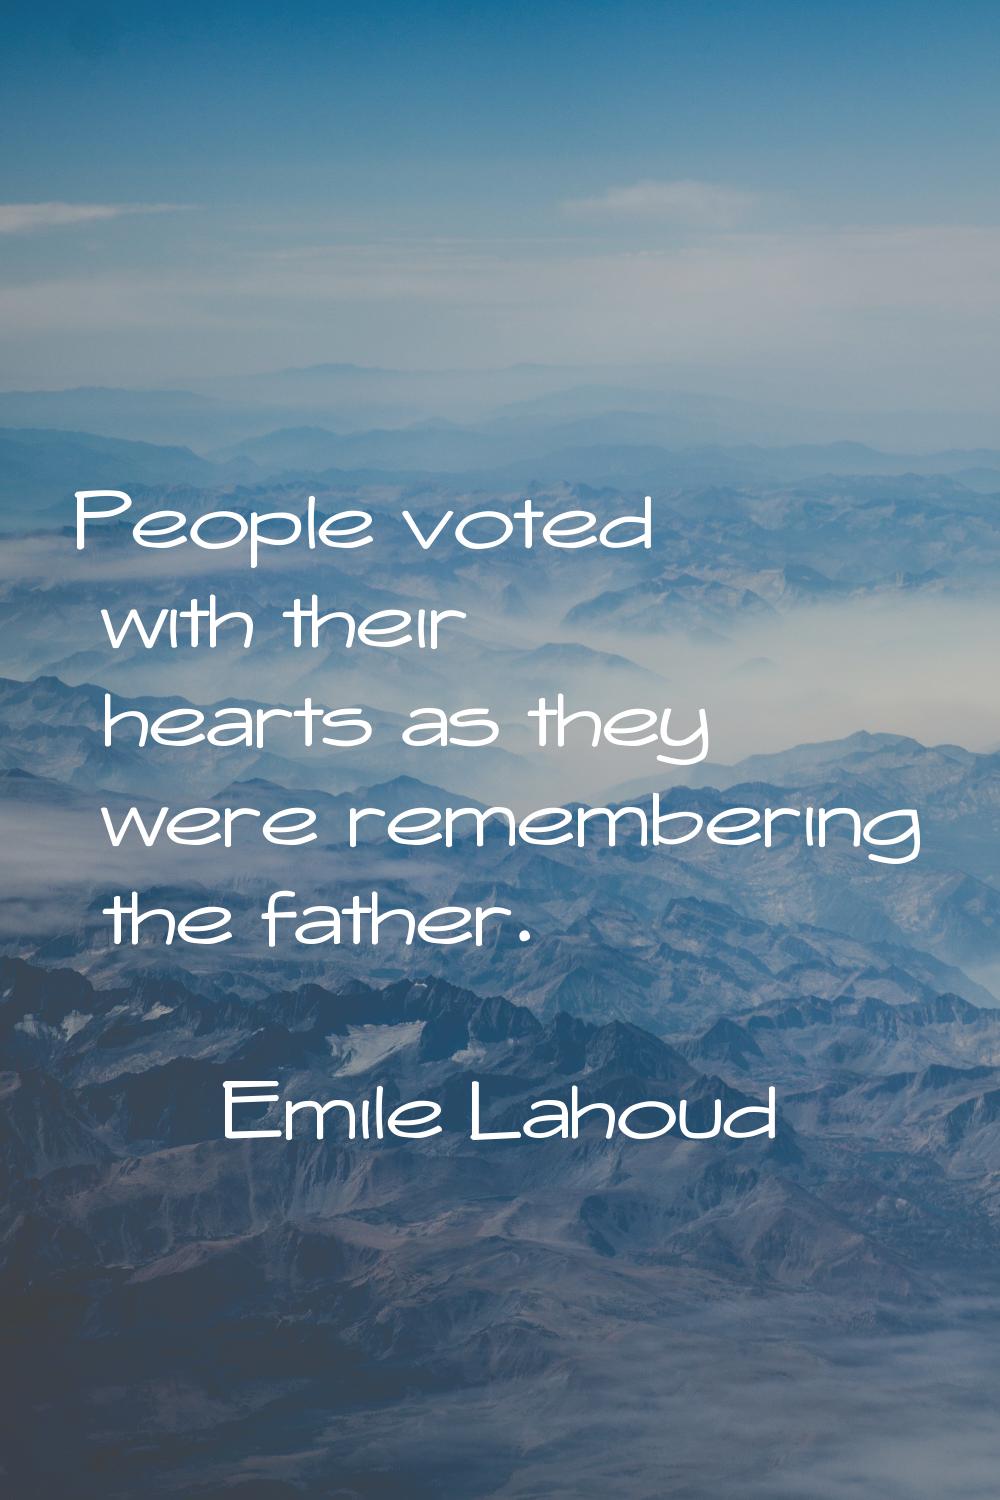 People voted with their hearts as they were remembering the father.